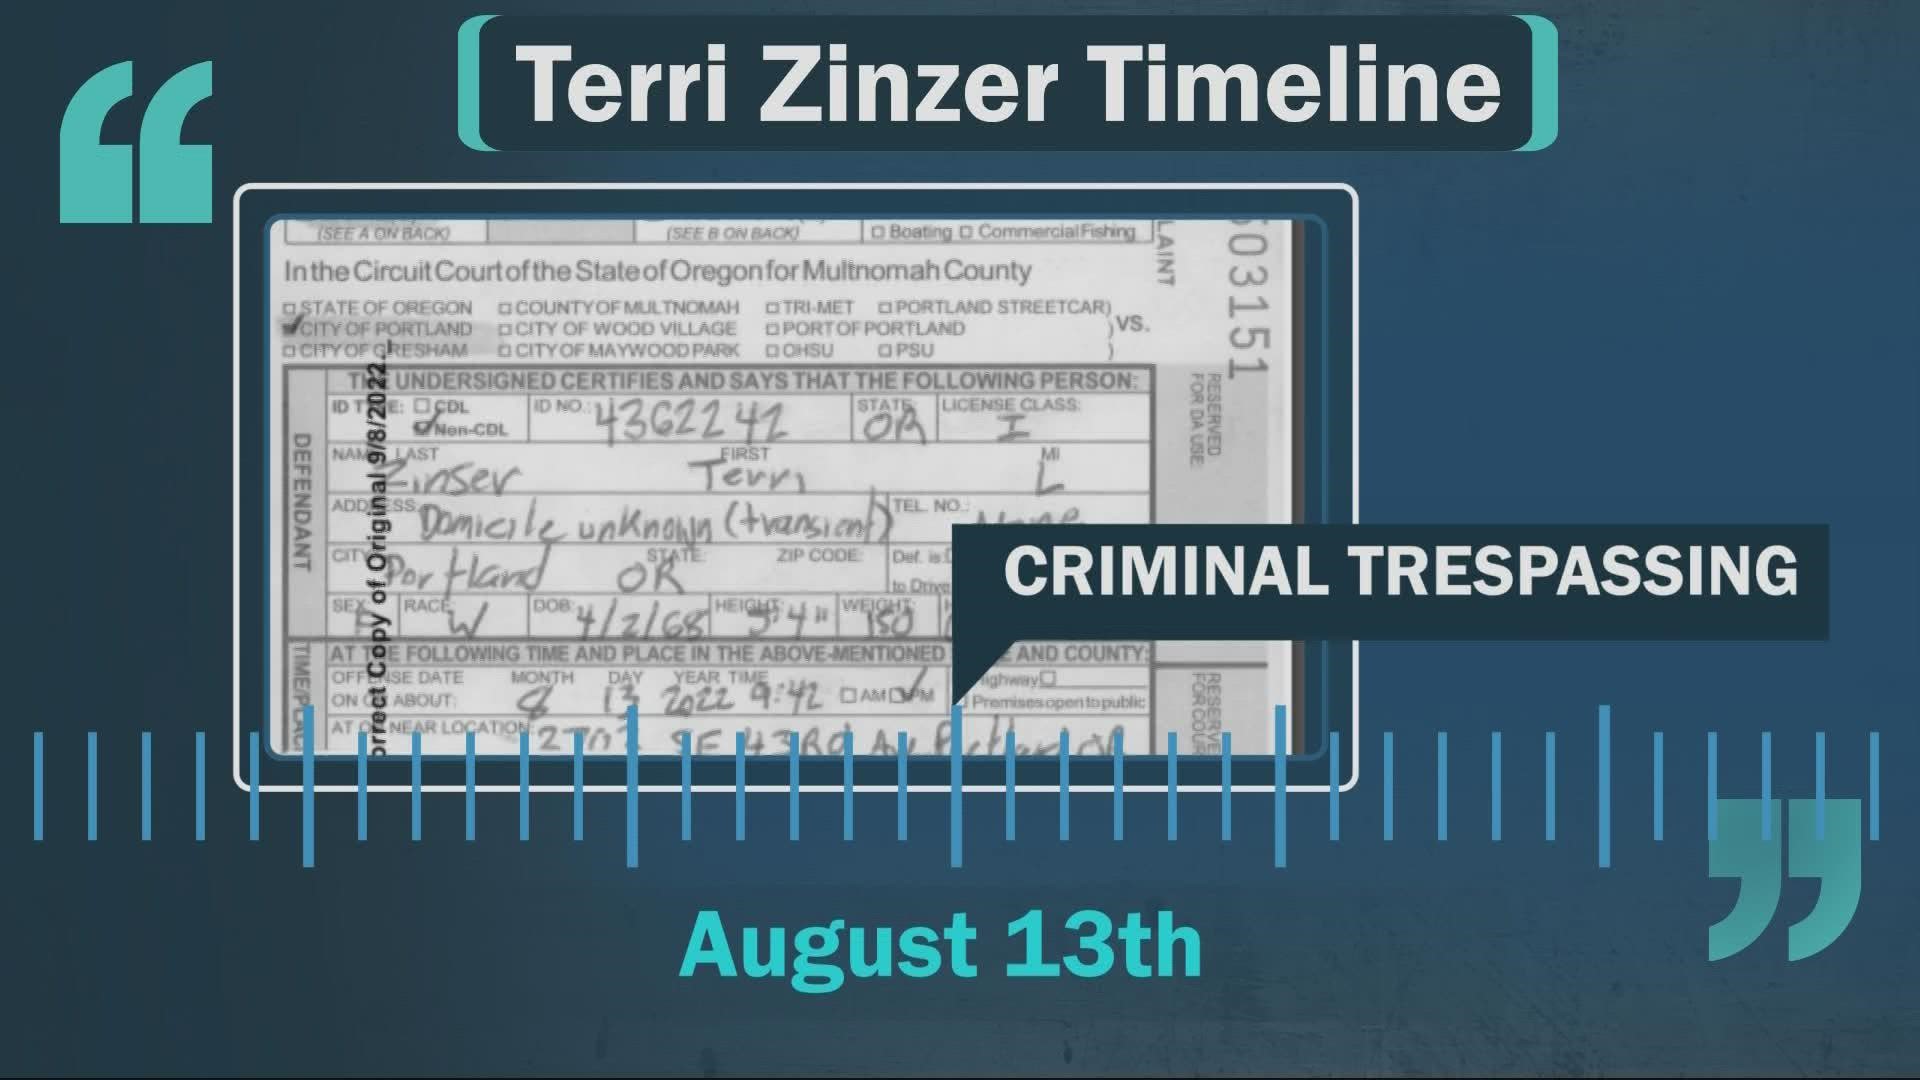 Terri Zinzer is racking up arrests for breaking into homes. The justice system appears unable to force her to get mental health help.